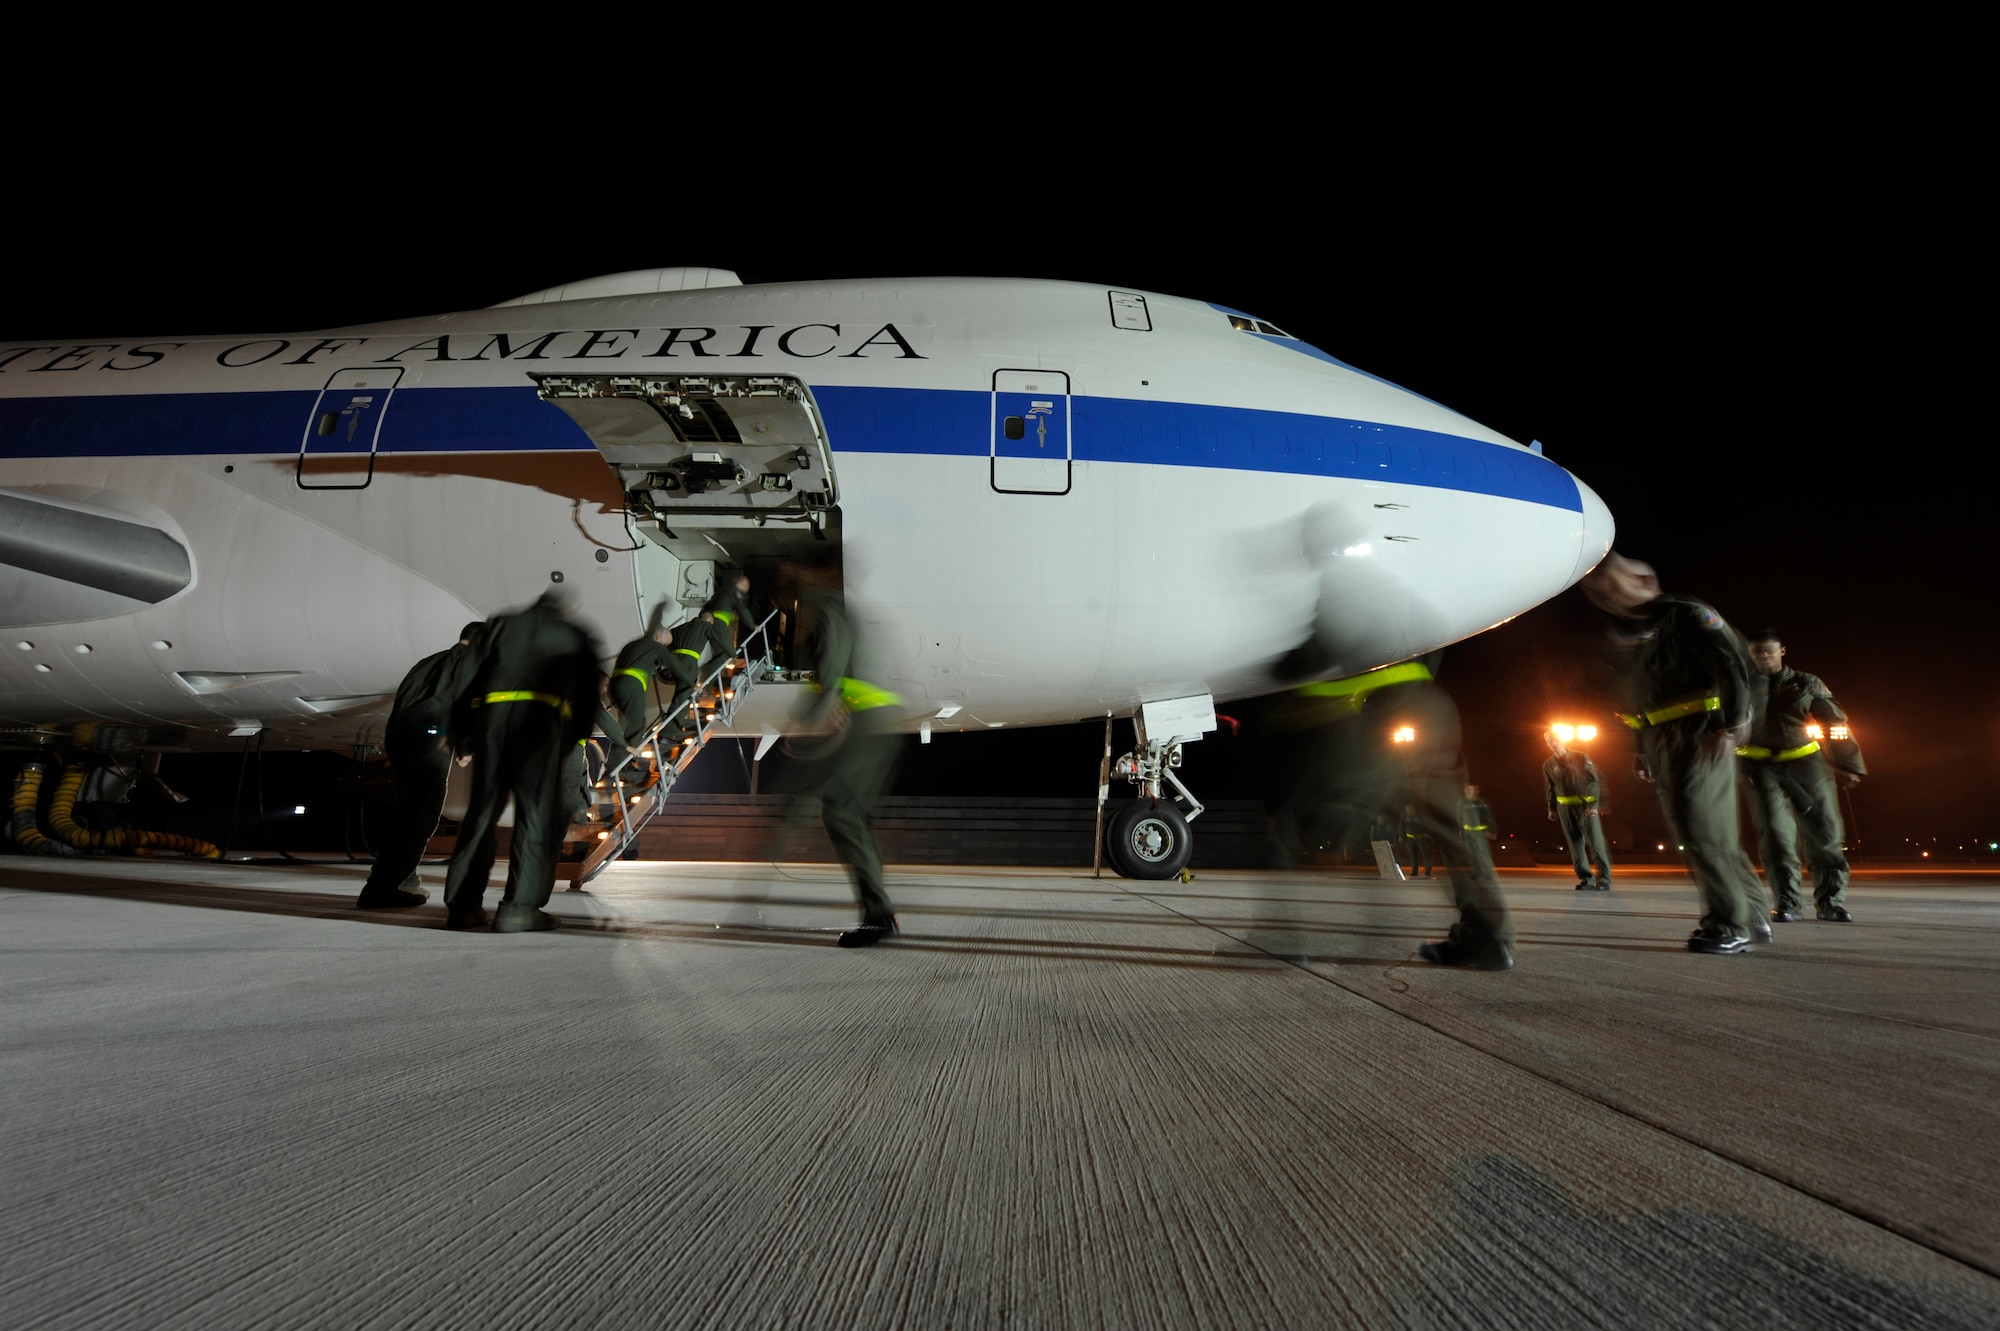 An aircrew from the 1st Airborne Command and Control Squadron board an E-4B at Offutt Air Force Base, Neb., during a simulated alert mission. The E-4B serves as the National Airborne Operations Center for the president, secretary of defense and chairman of the Joint Chiefs of Staff. The aircraft passed a significant milestone this month by sitting alert constantly for more than 35 years. (U.S. Air Force photo/Lance Cheung)